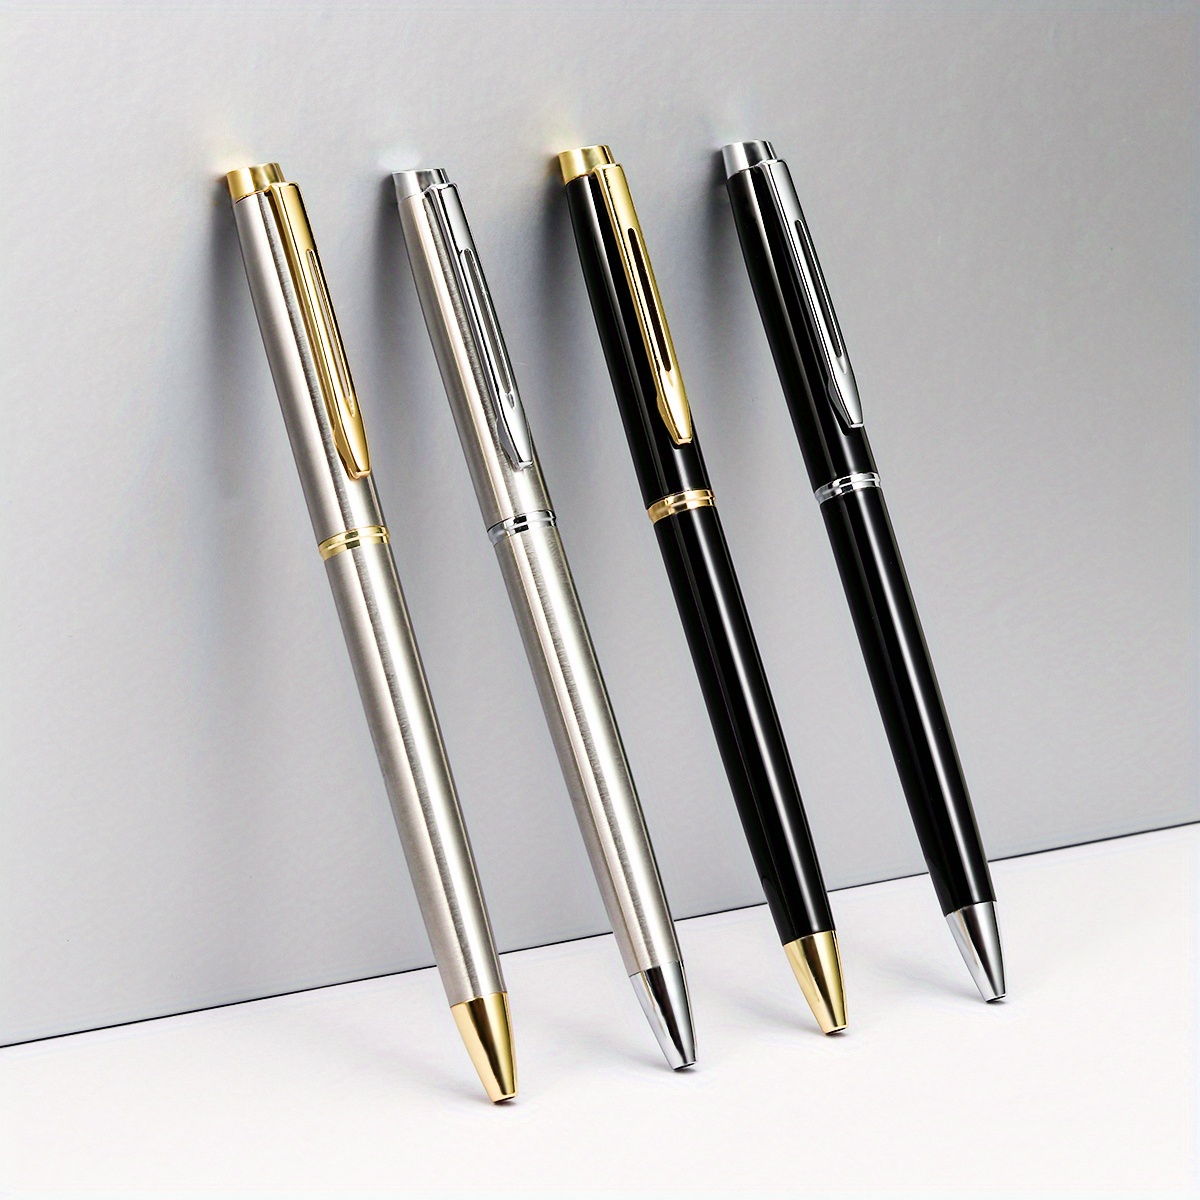 

1pc Ballpoint Pens Black Pens Medium Ball Point 1.0mm Smooth Writing Grip Metal Retractable Executive Business Office Fancy Nice Gift Pen For Men Women